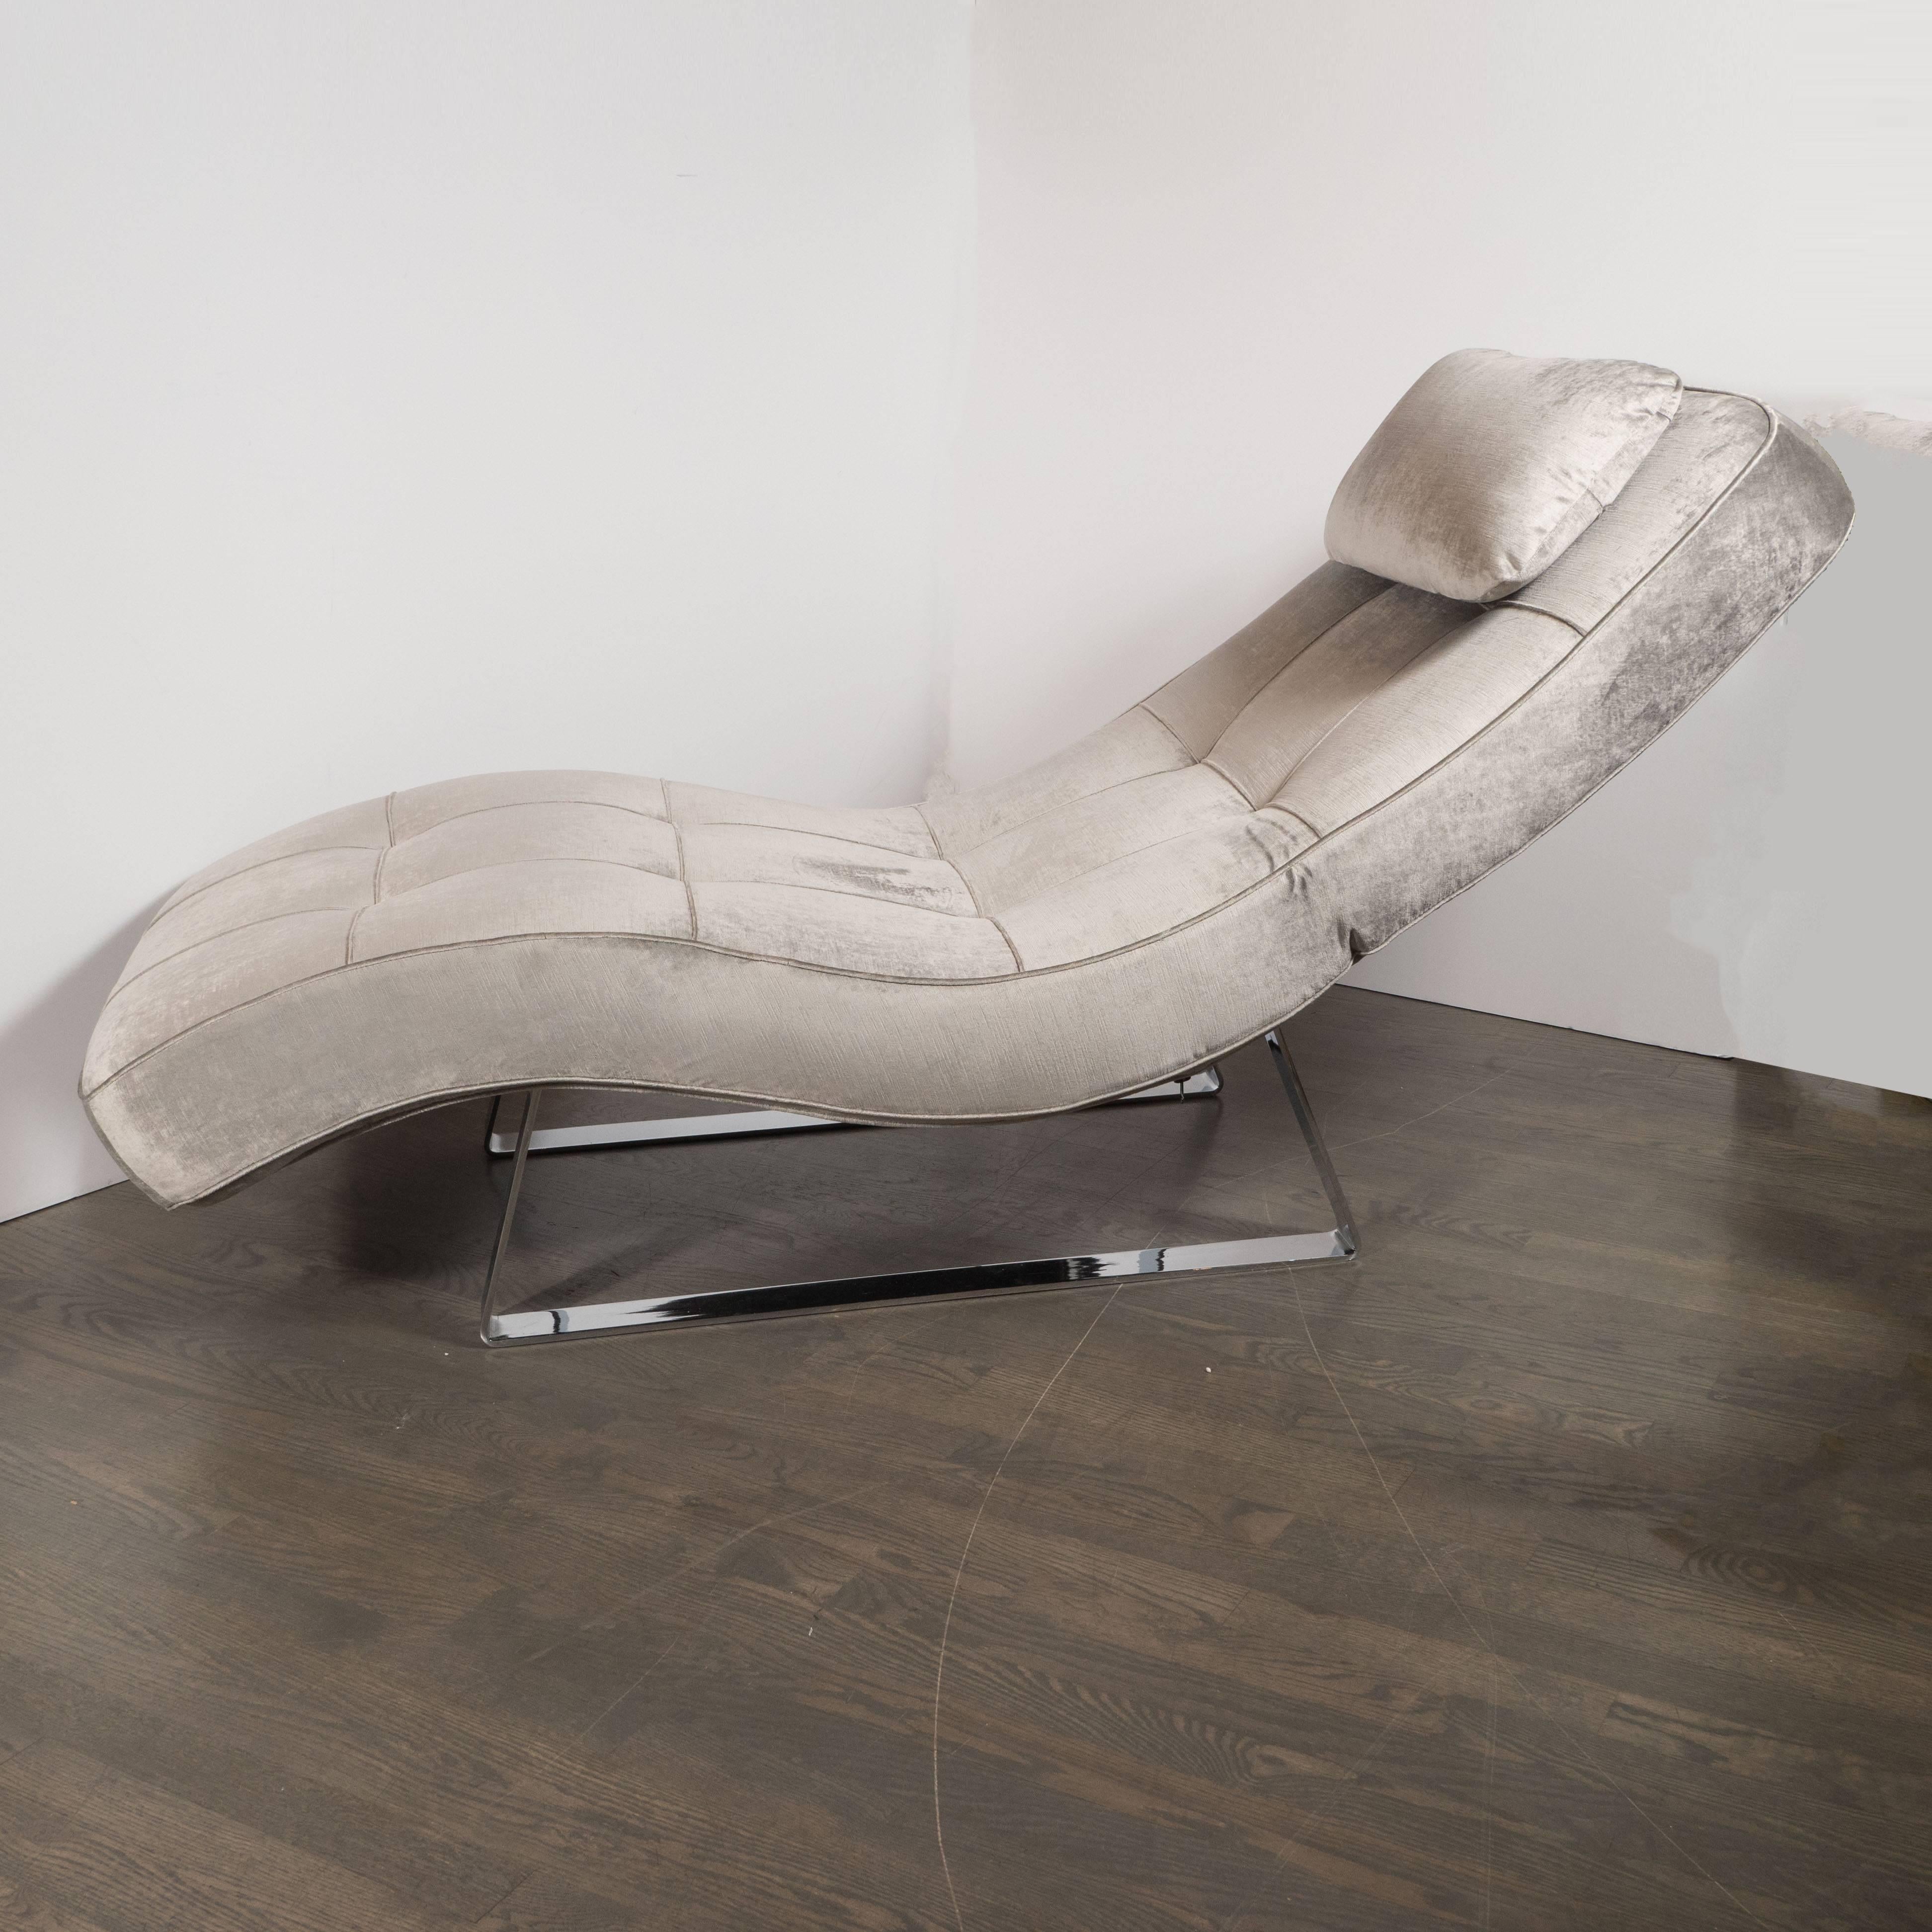 This elegant sculptural chaise is full of interesting contrasts- the undulating curves of the body juxtaposed with the rectilinear base, the softness of the velvet (both in visual and tactile terms) upholstery and the metallic rigidity of the chrome